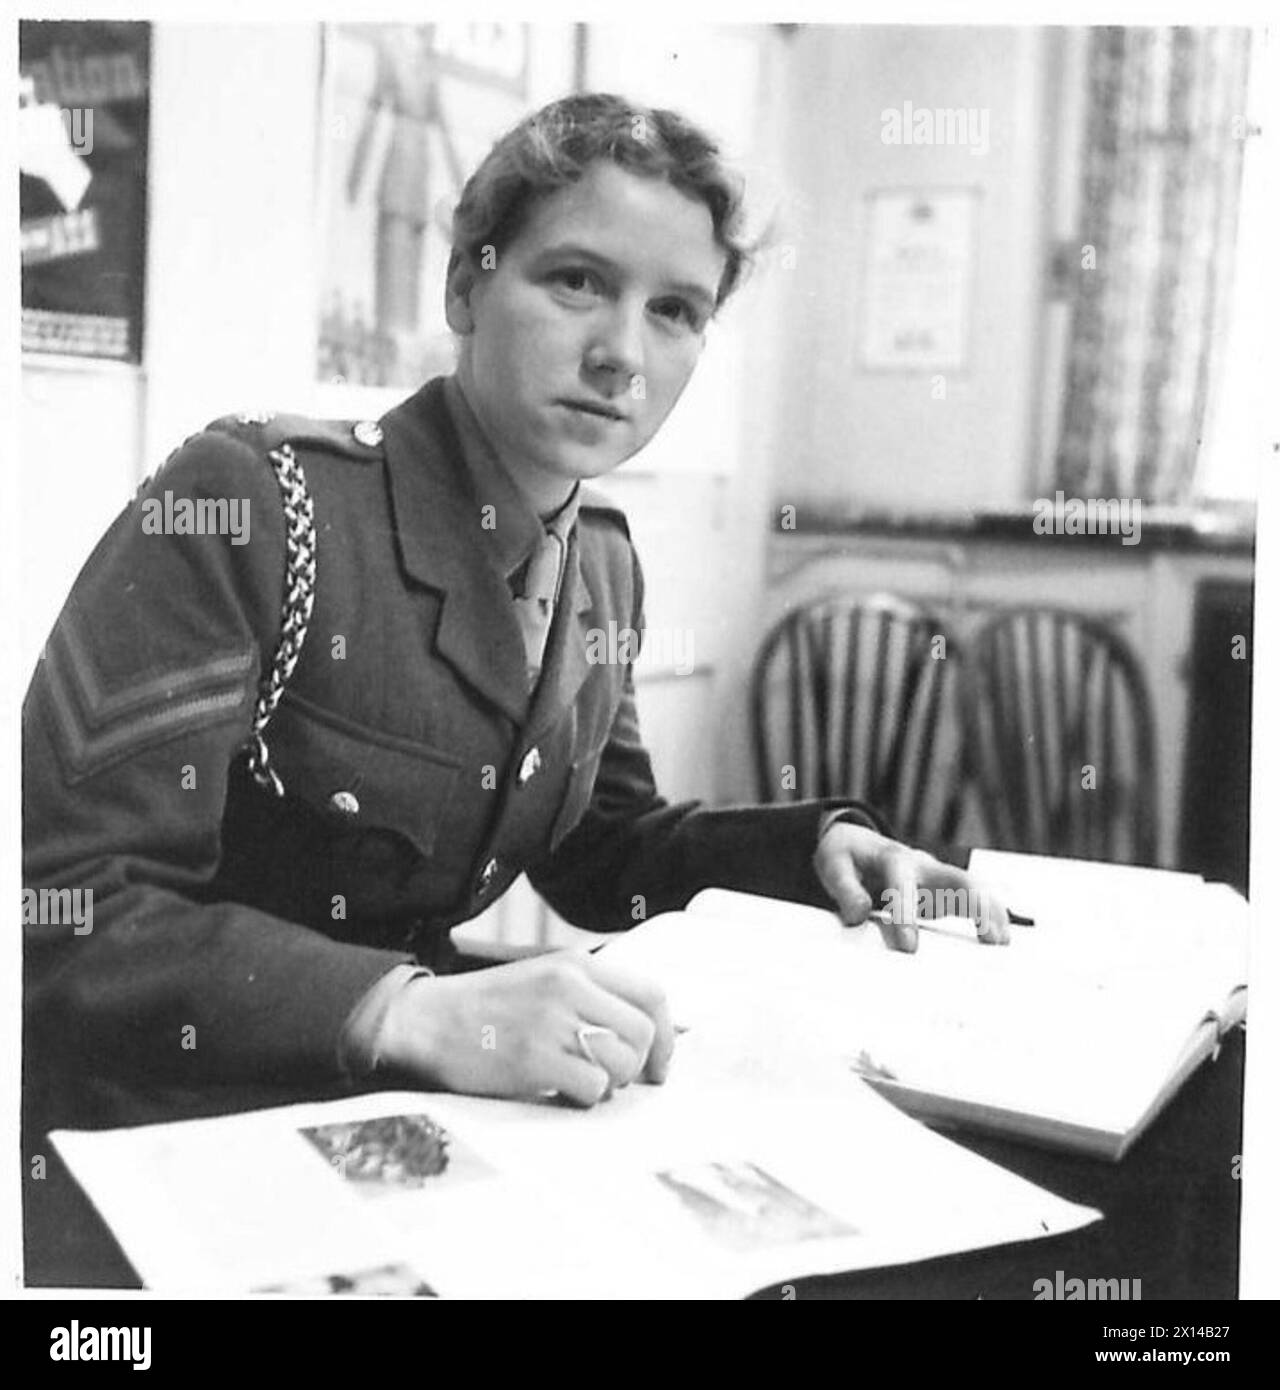 ATS RECRUITING CORPORALS - Cpl. Lois Hurd of Leafield Road, Disley, Cheshire.  caption book British Army Stock Photo